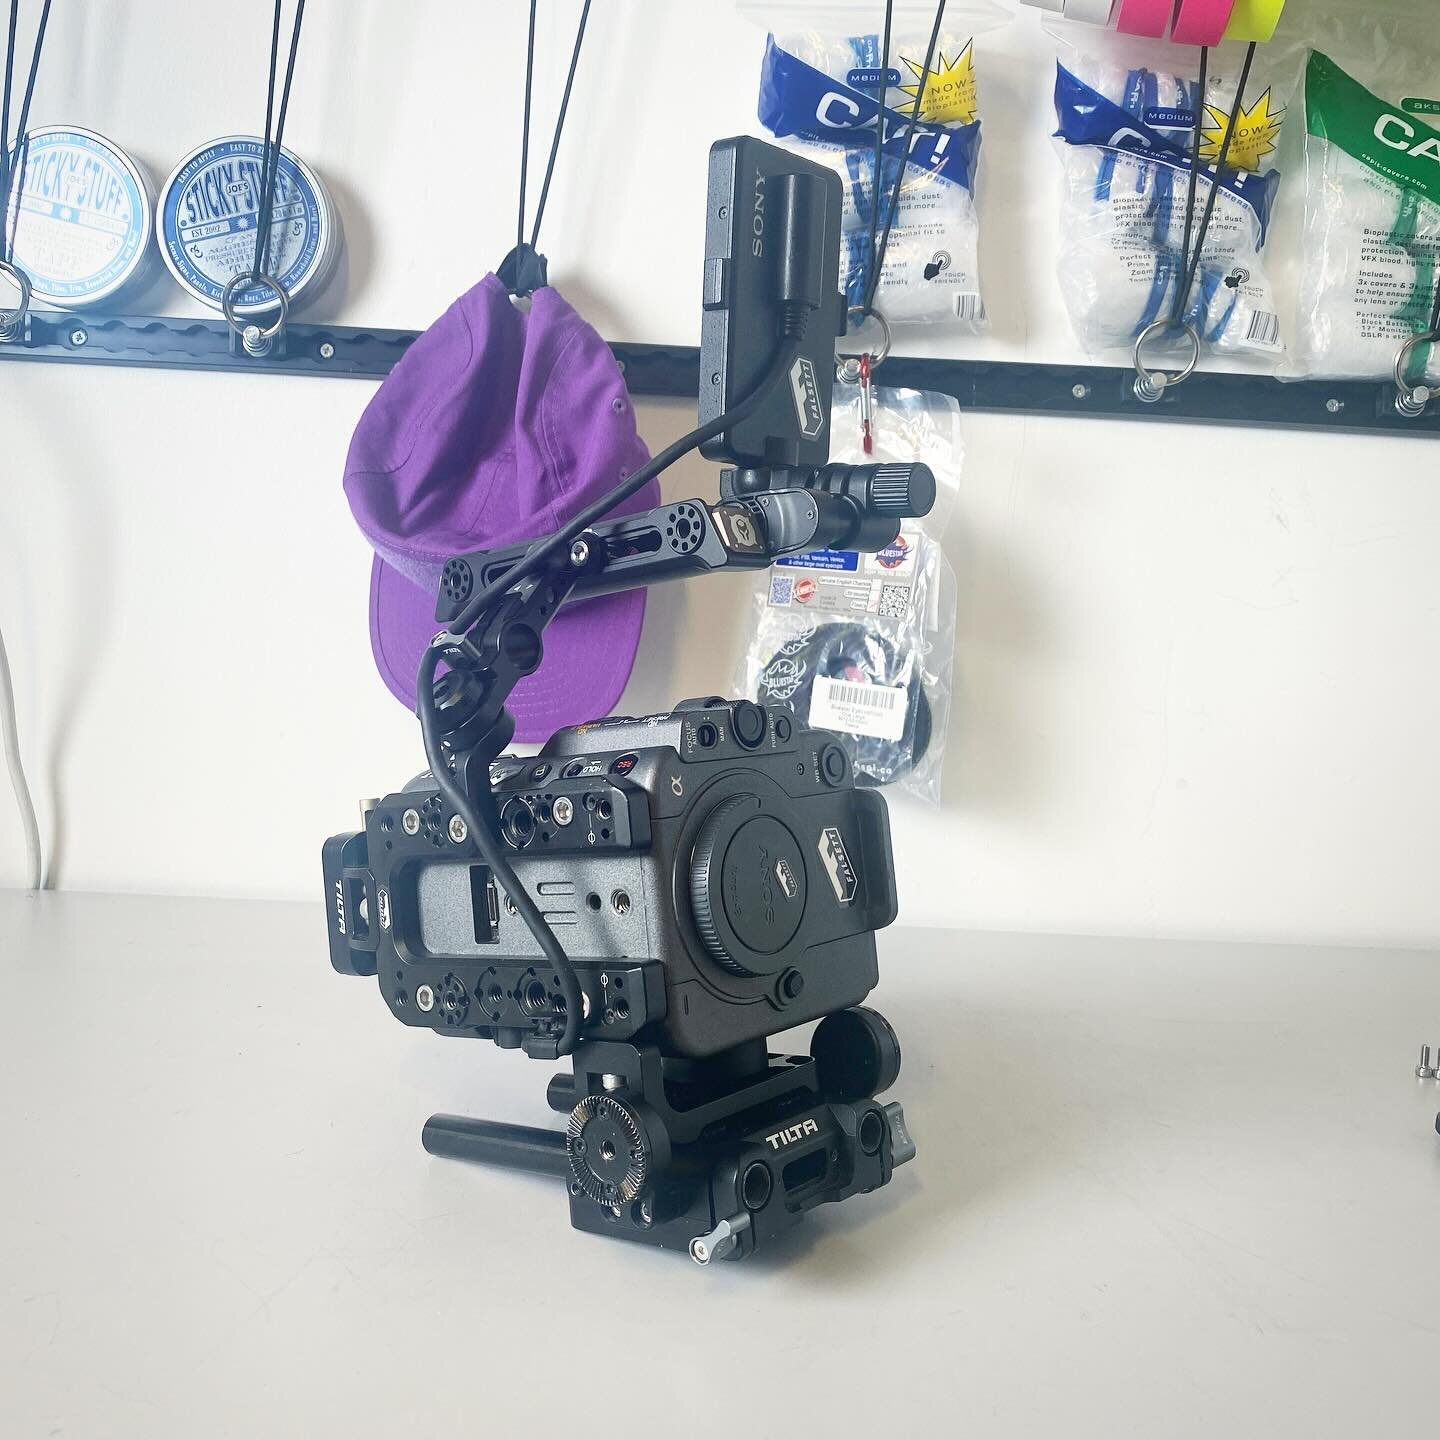 We have a new vertical mount kit for our FX6. The new setup allows you to use the standard baseplate so you can still use the included dovetail and sets the lens at the correct height for accessories. Also included in the kit is an adjustable top han